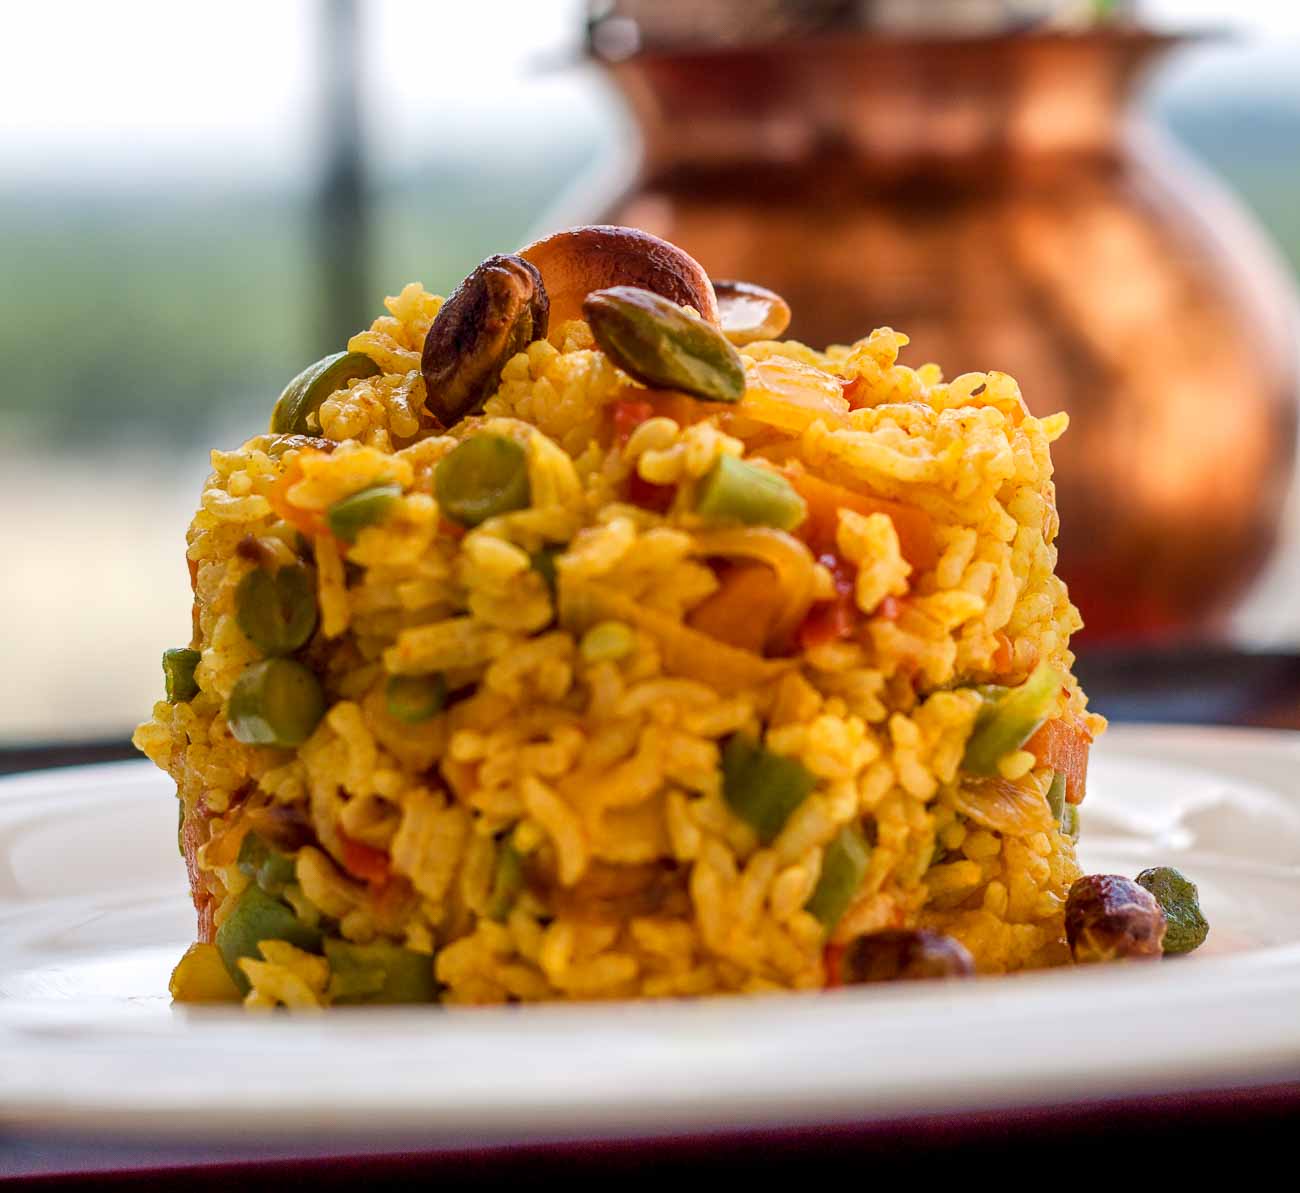 Gujarati Badshahi Pulao Recipe - A Rich Preparation Of Rice, Vegetables, Nuts And Spices